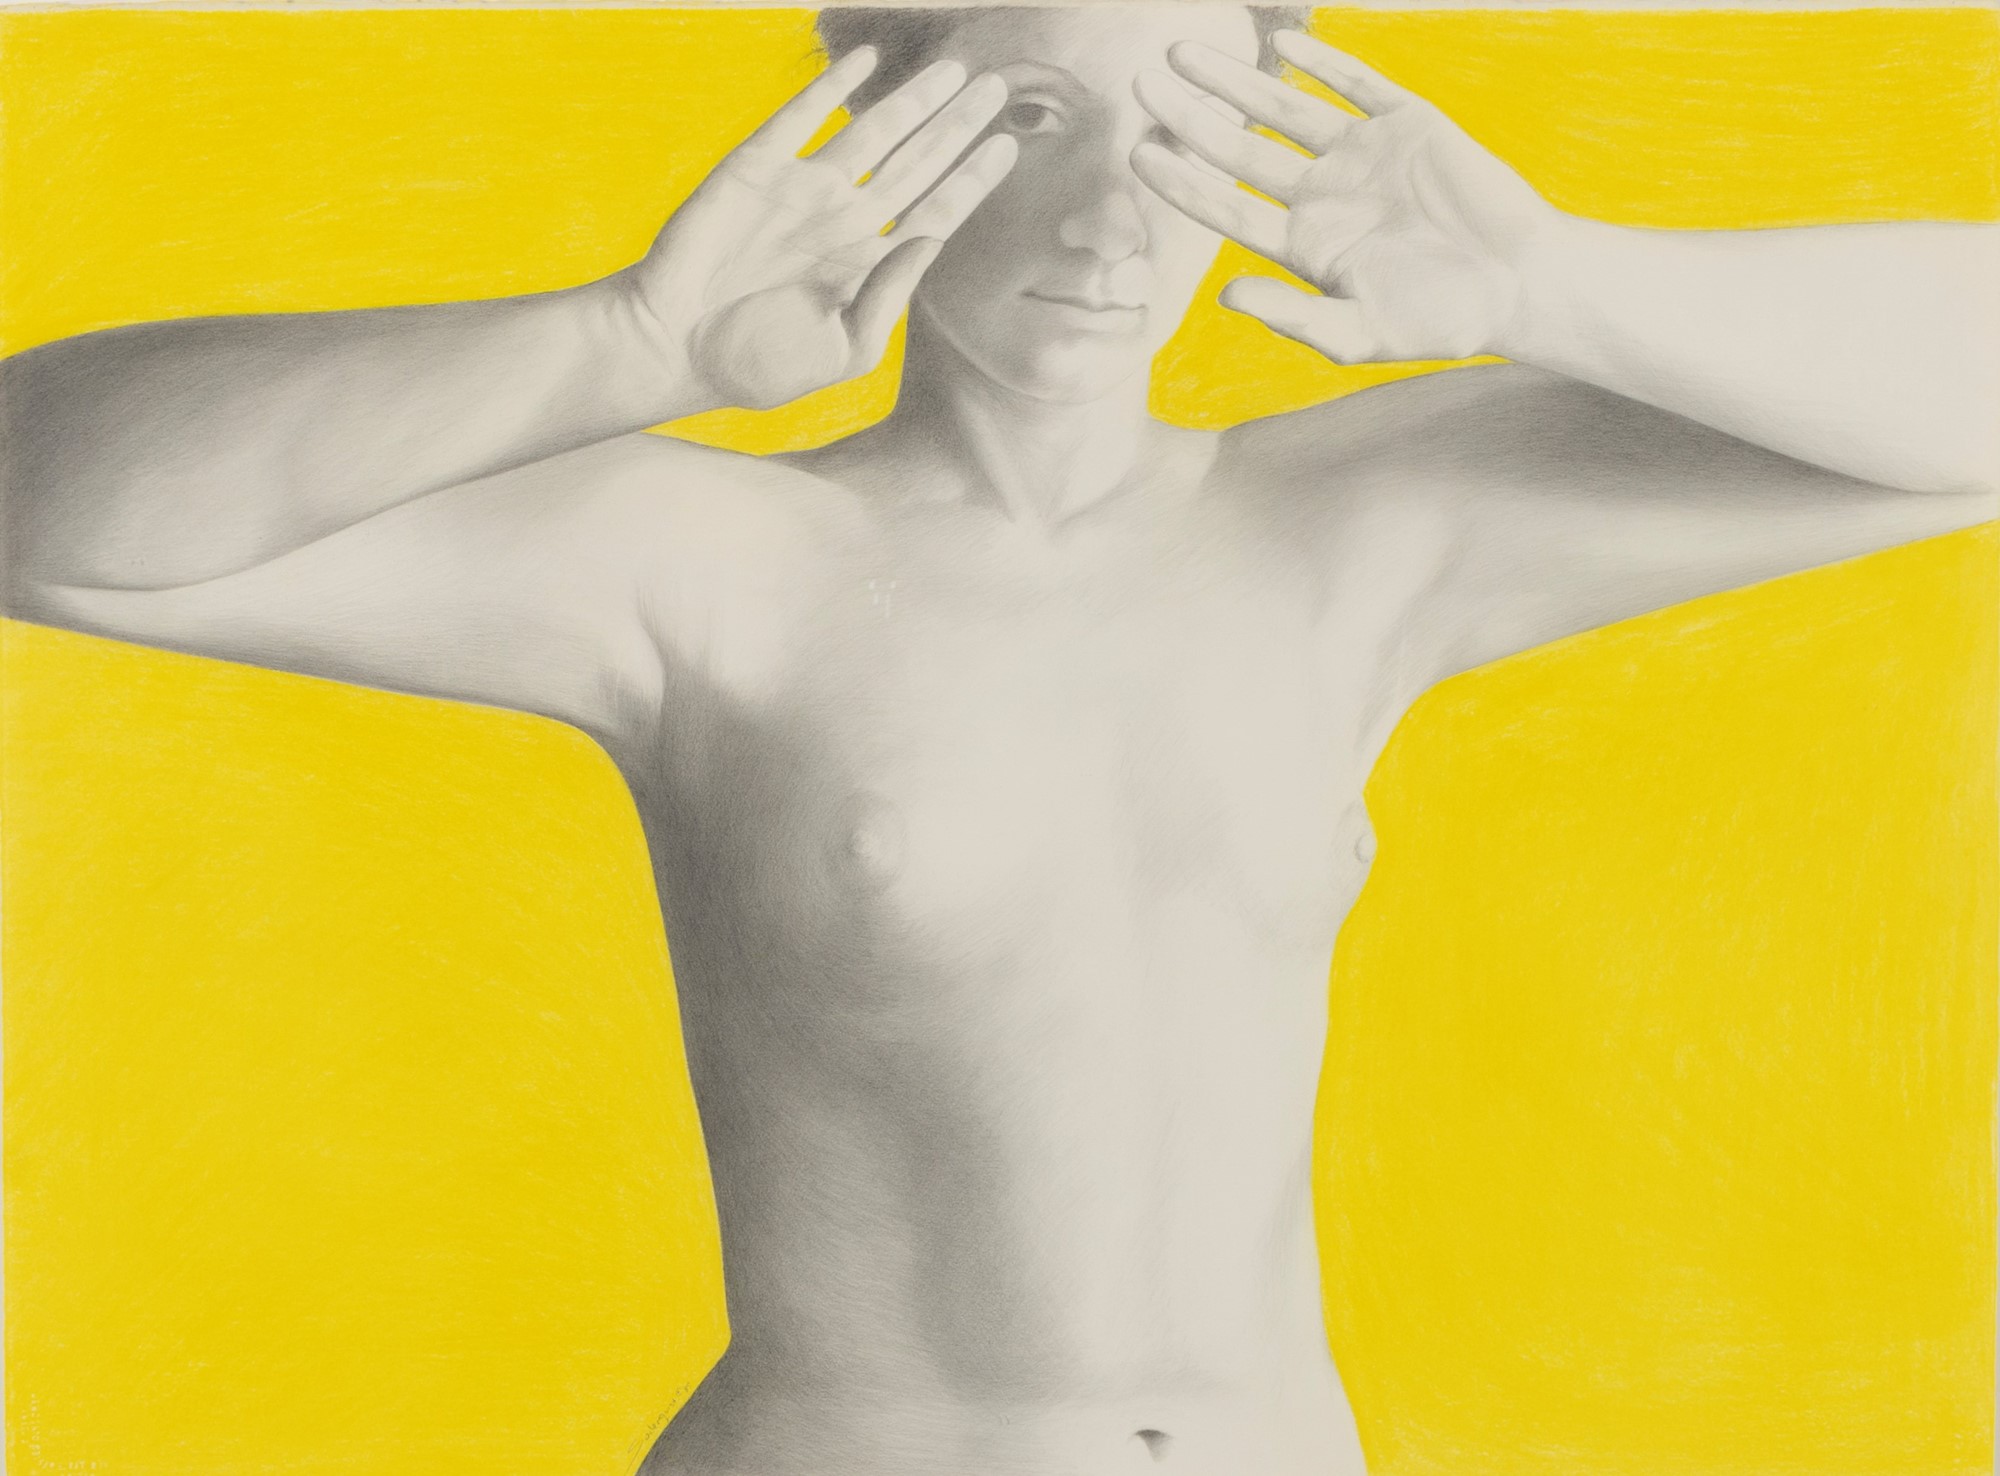 Image of a 1985 graphite and nupastel on paper drawing of a nude figure from the waist up on a yellow background